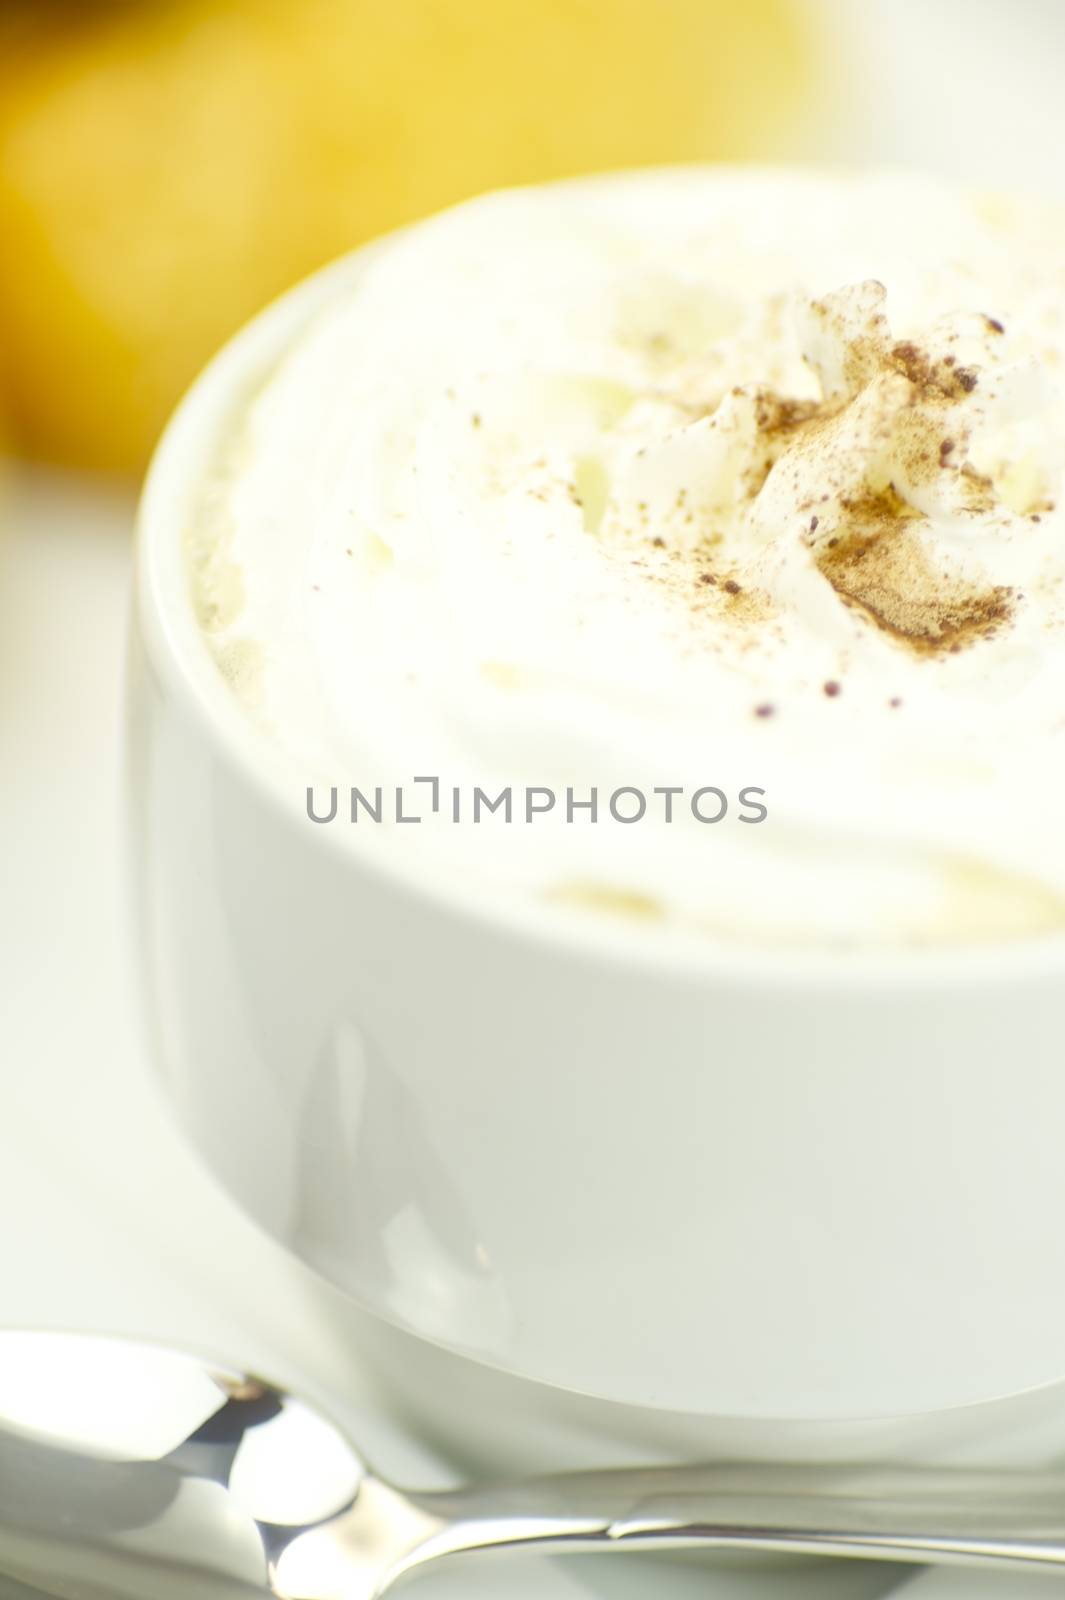 Whipped Cream Coffee. White Elegant Coffe Cup. Cafe Table